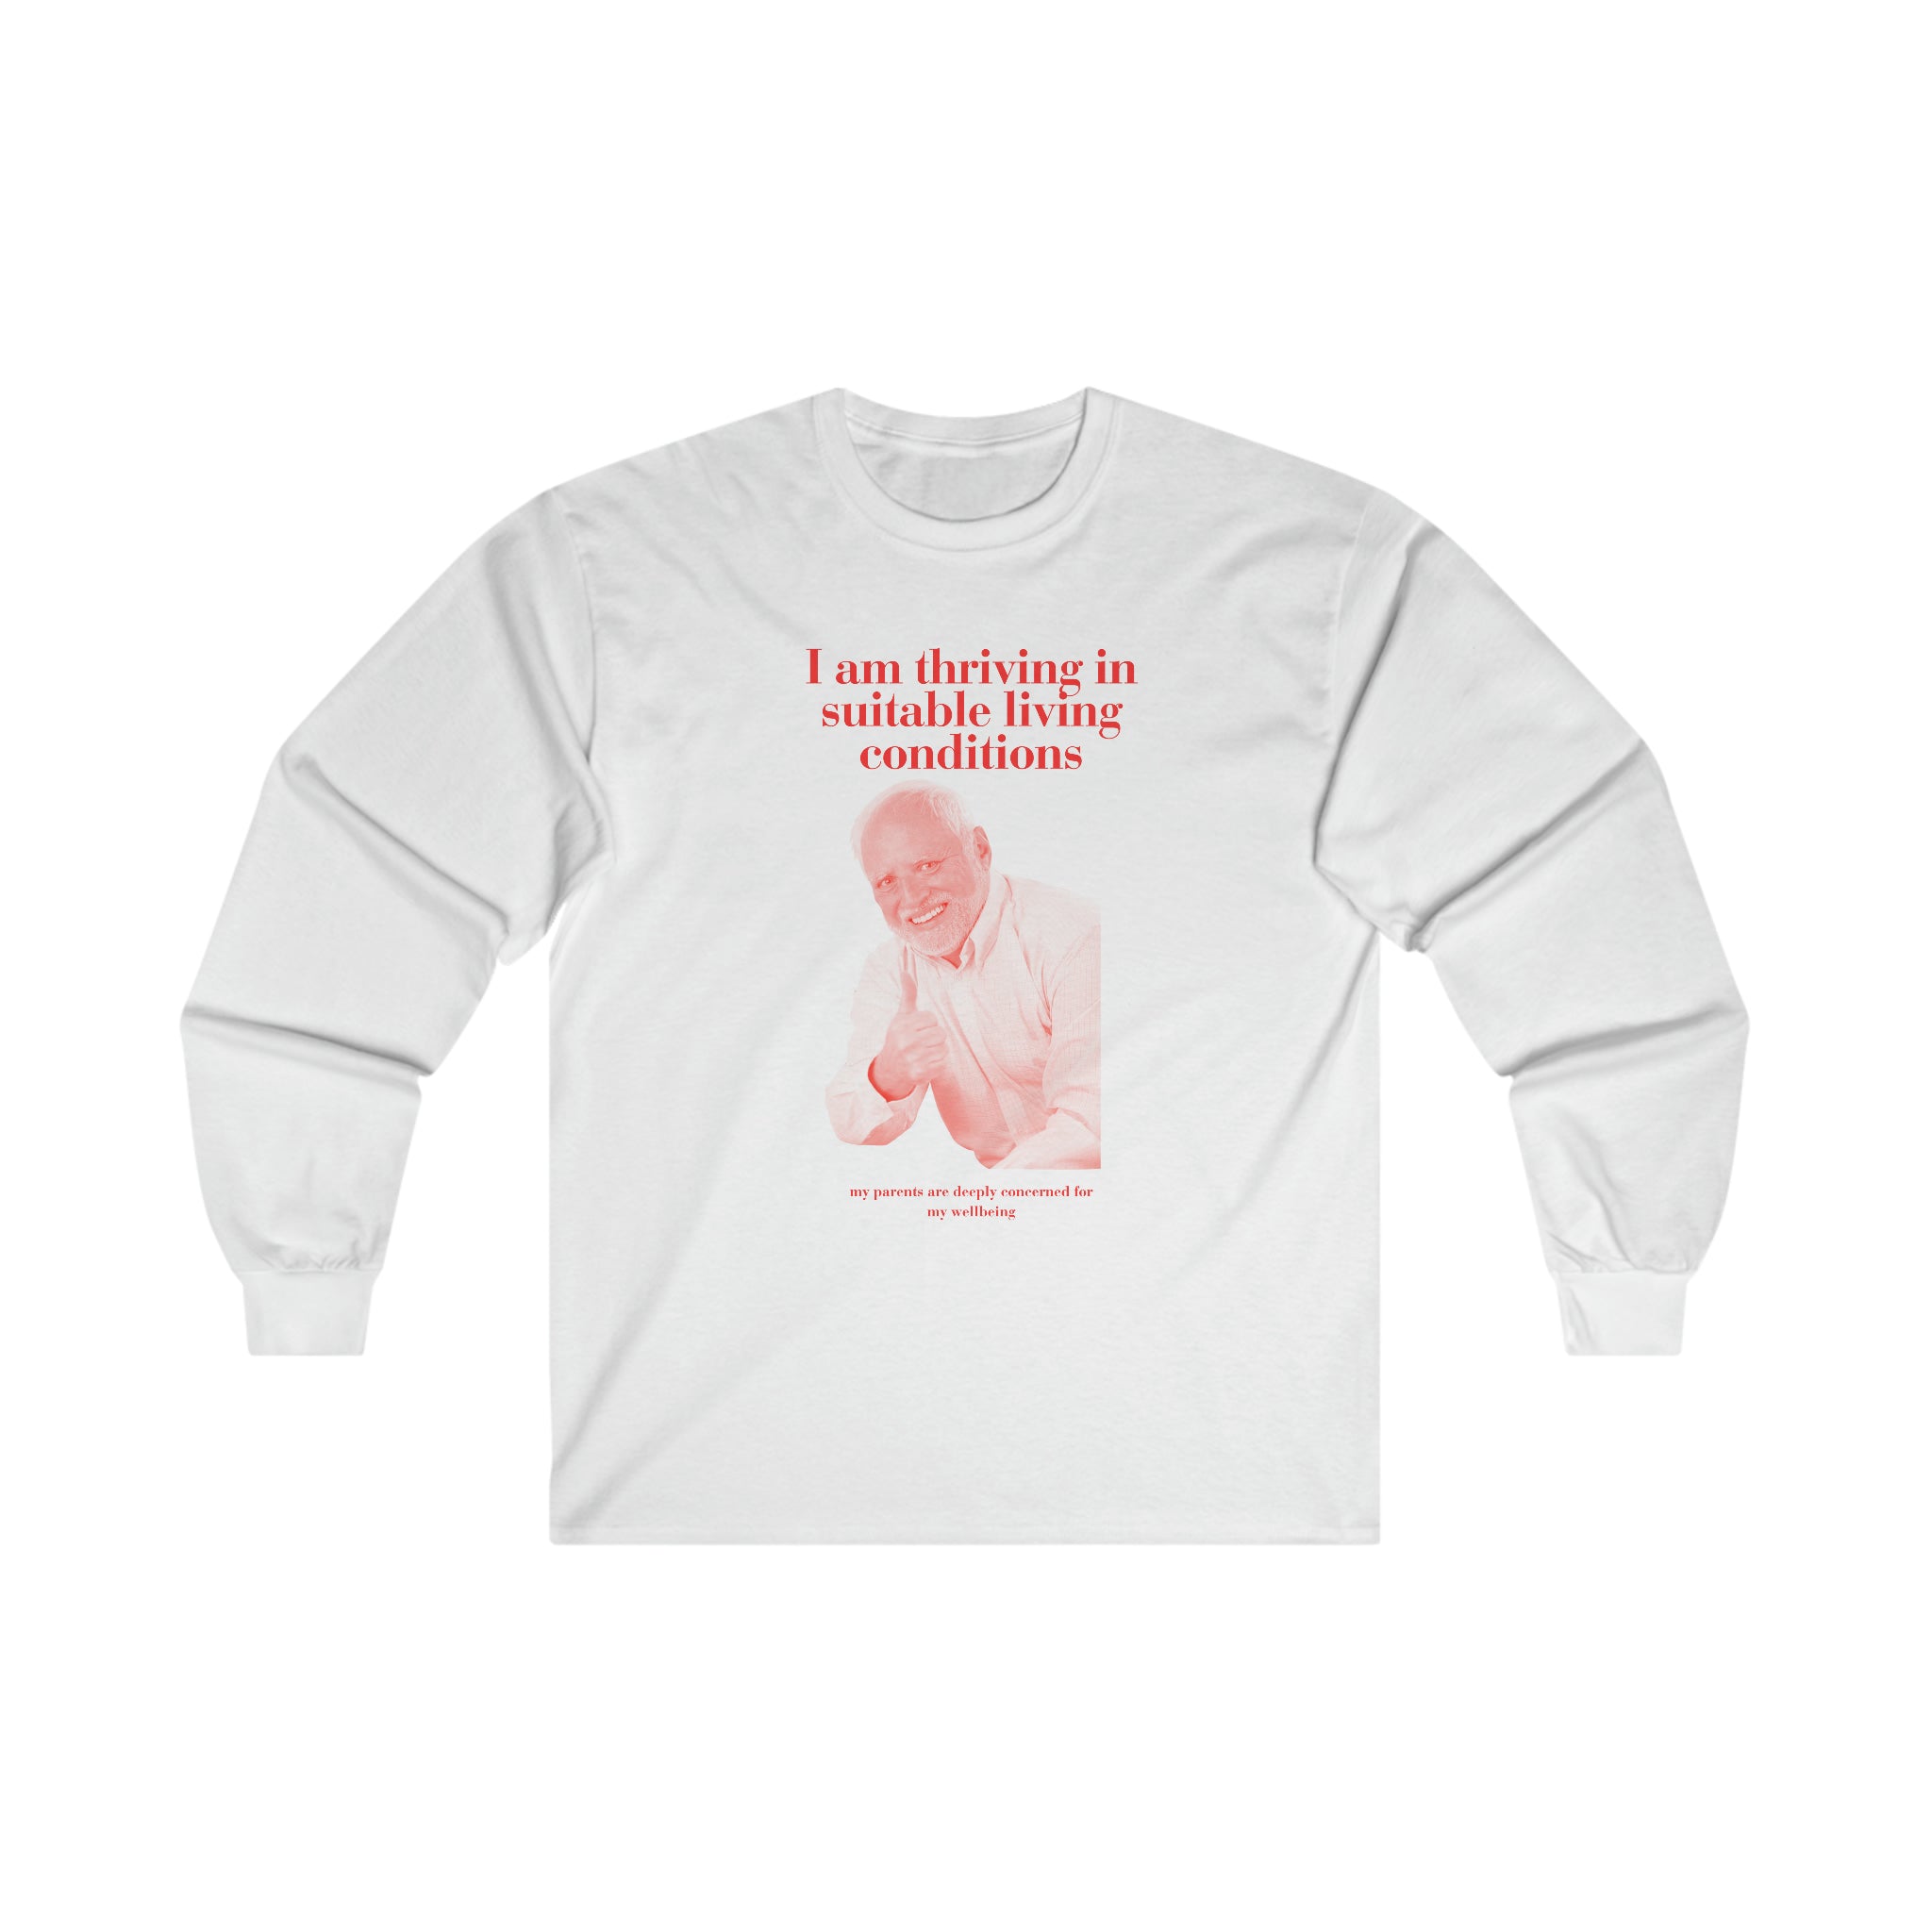 I am thriving in suitable living conditions - Ultra Cotton Long Sleeve Tee